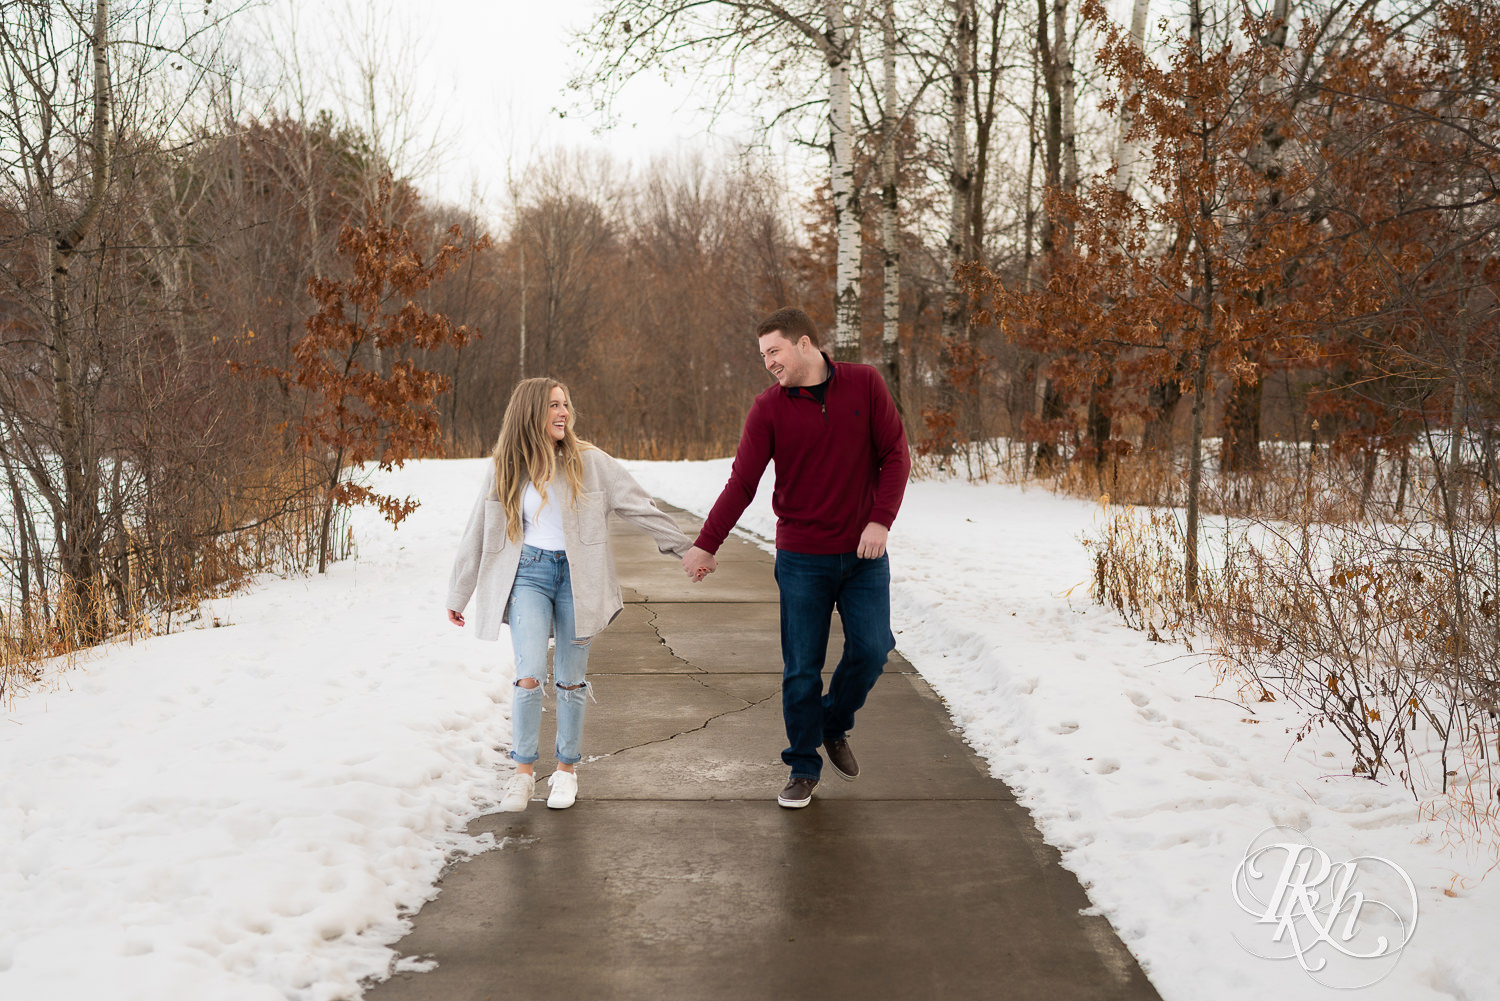 A couple walks down the snowy path in a park smiling at one another.